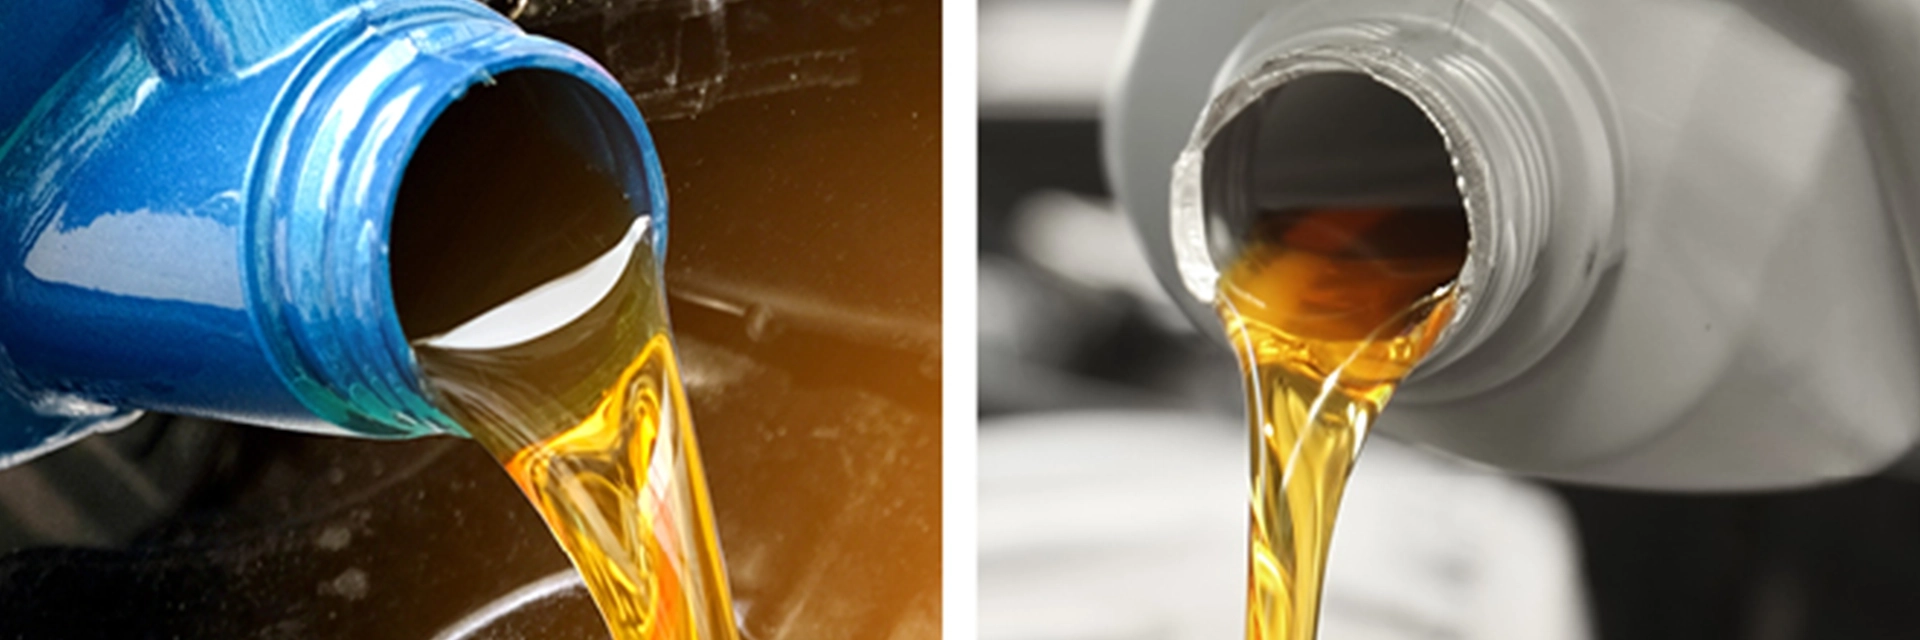 Synthetic Oil vs Conventional Oil